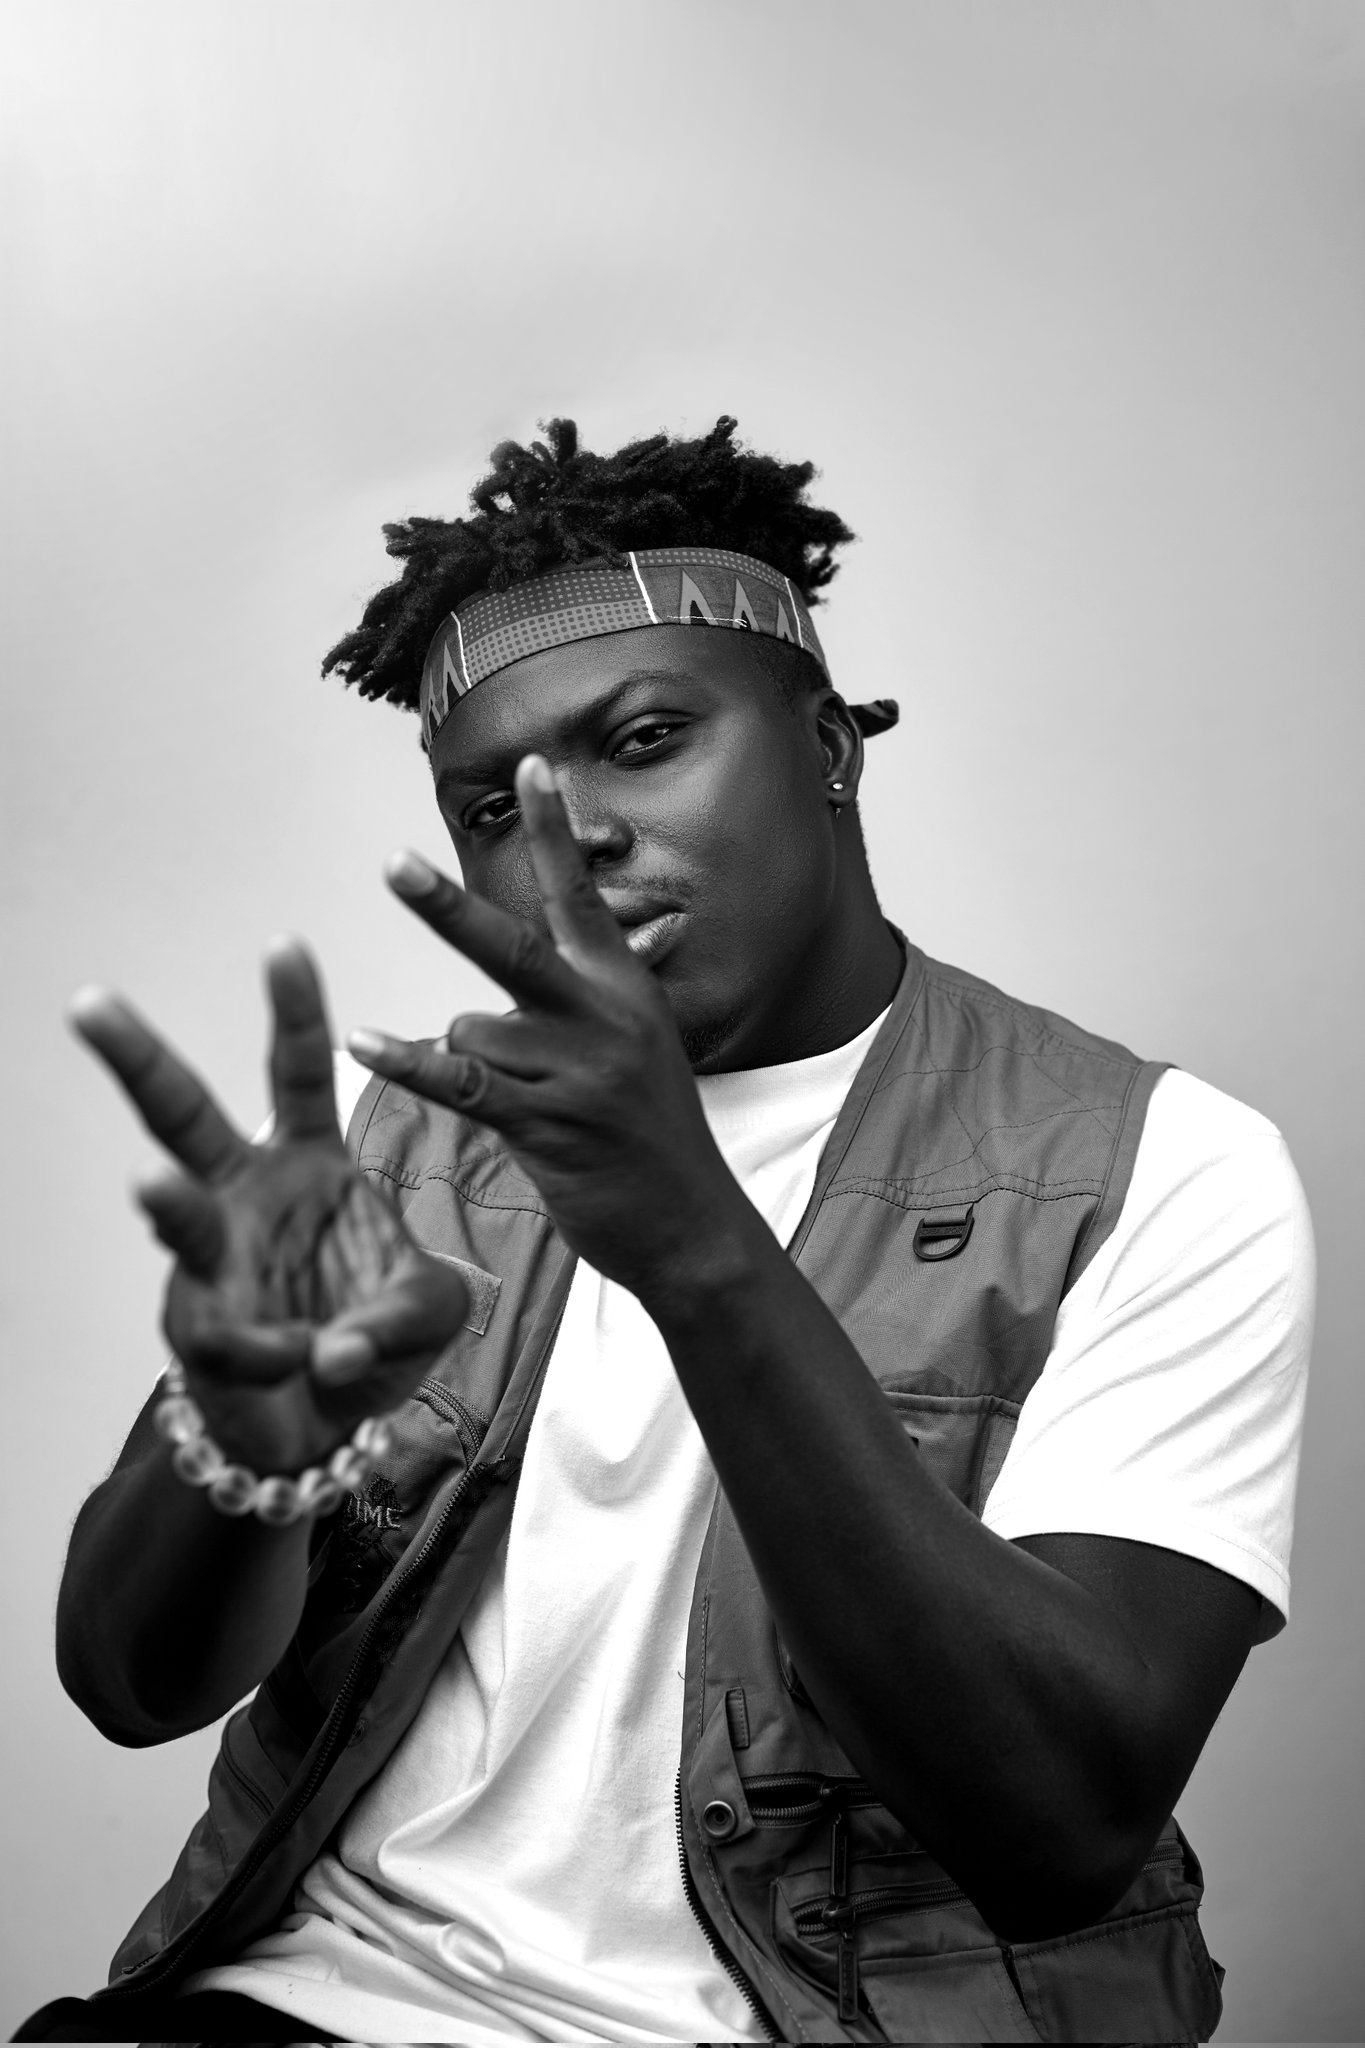 Keddi Drops visuals for his highly anticipated "AFOLEY" song